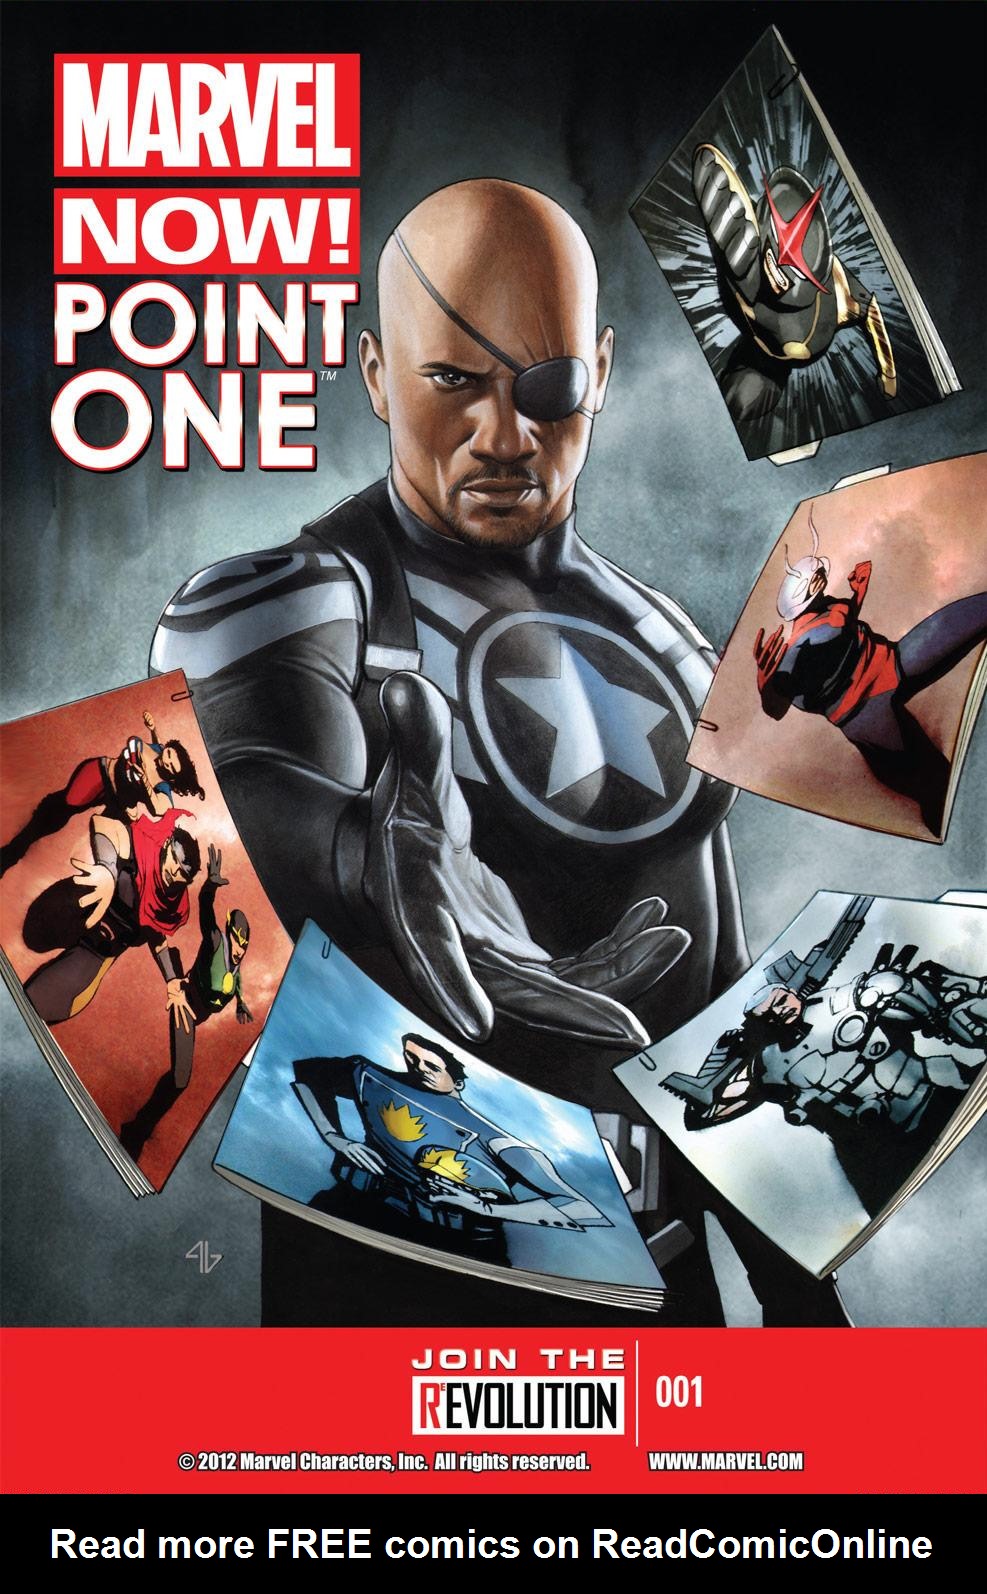 Read online Marvel Now! Point One comic -  Issue # Full - 1